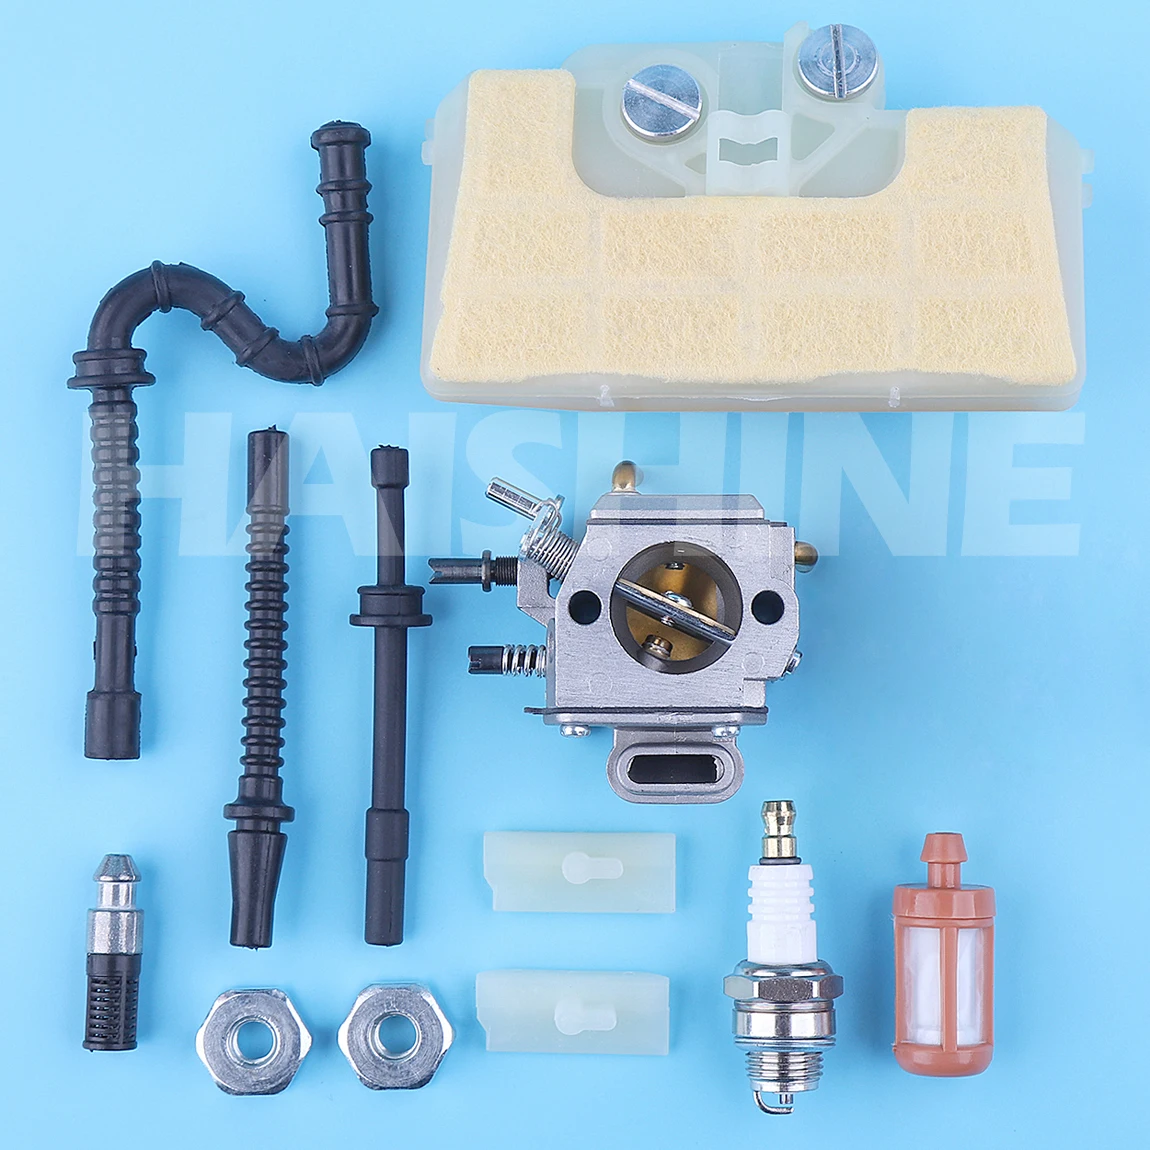 

Carburetor Air Fuel Filter Line Tune Up Kit For Stihl MS290 MS310 MS390 029 039 MS 290 310 390 Chainsaw 1127 120 0650 Carb